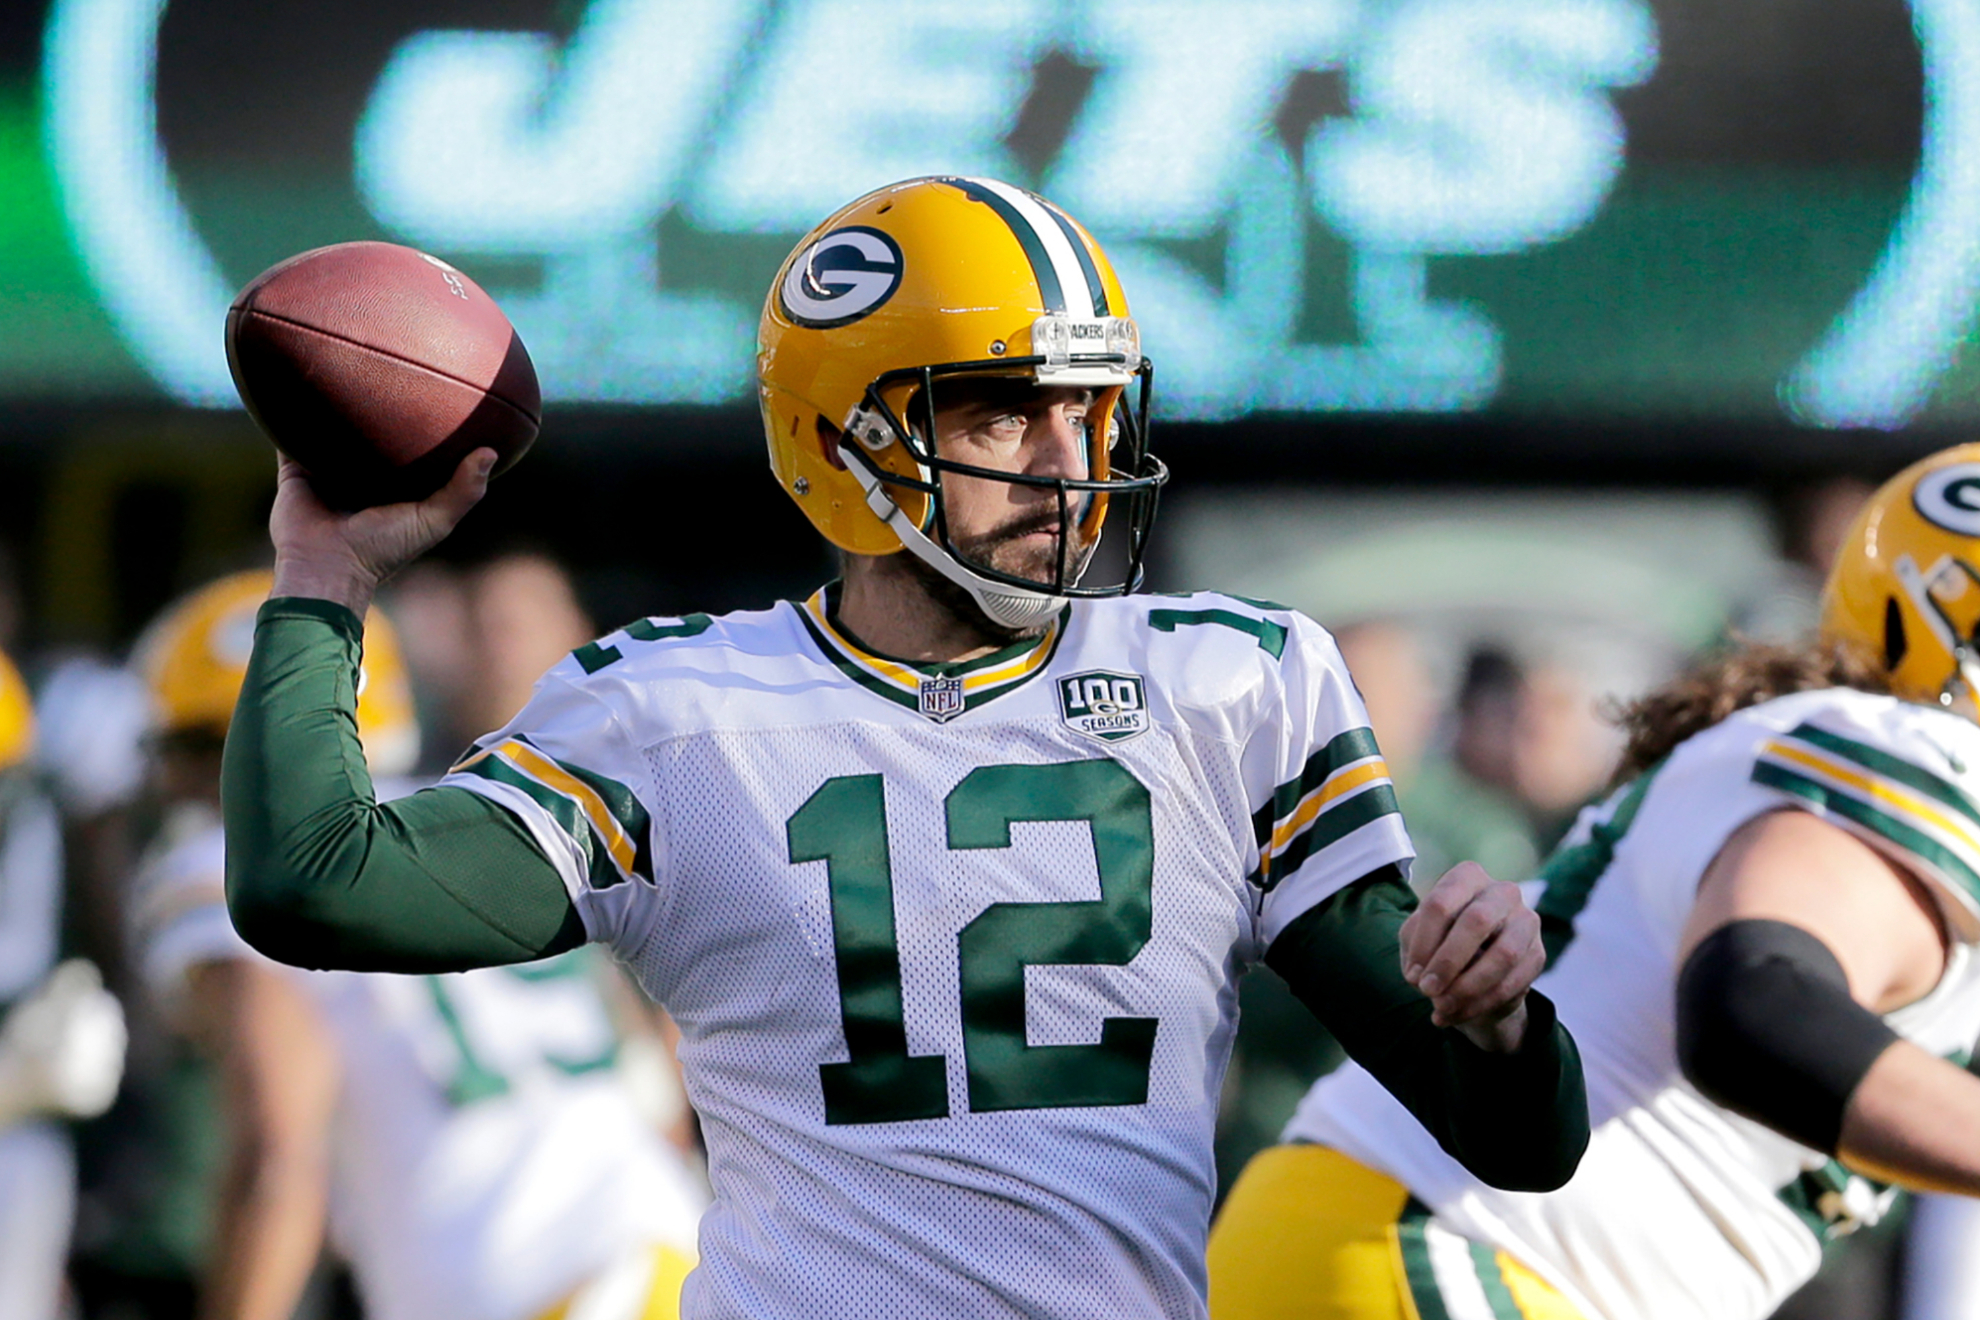 The great jersey debate: What number will Aaron Rodgers wear for the Jets,  12 or 8?